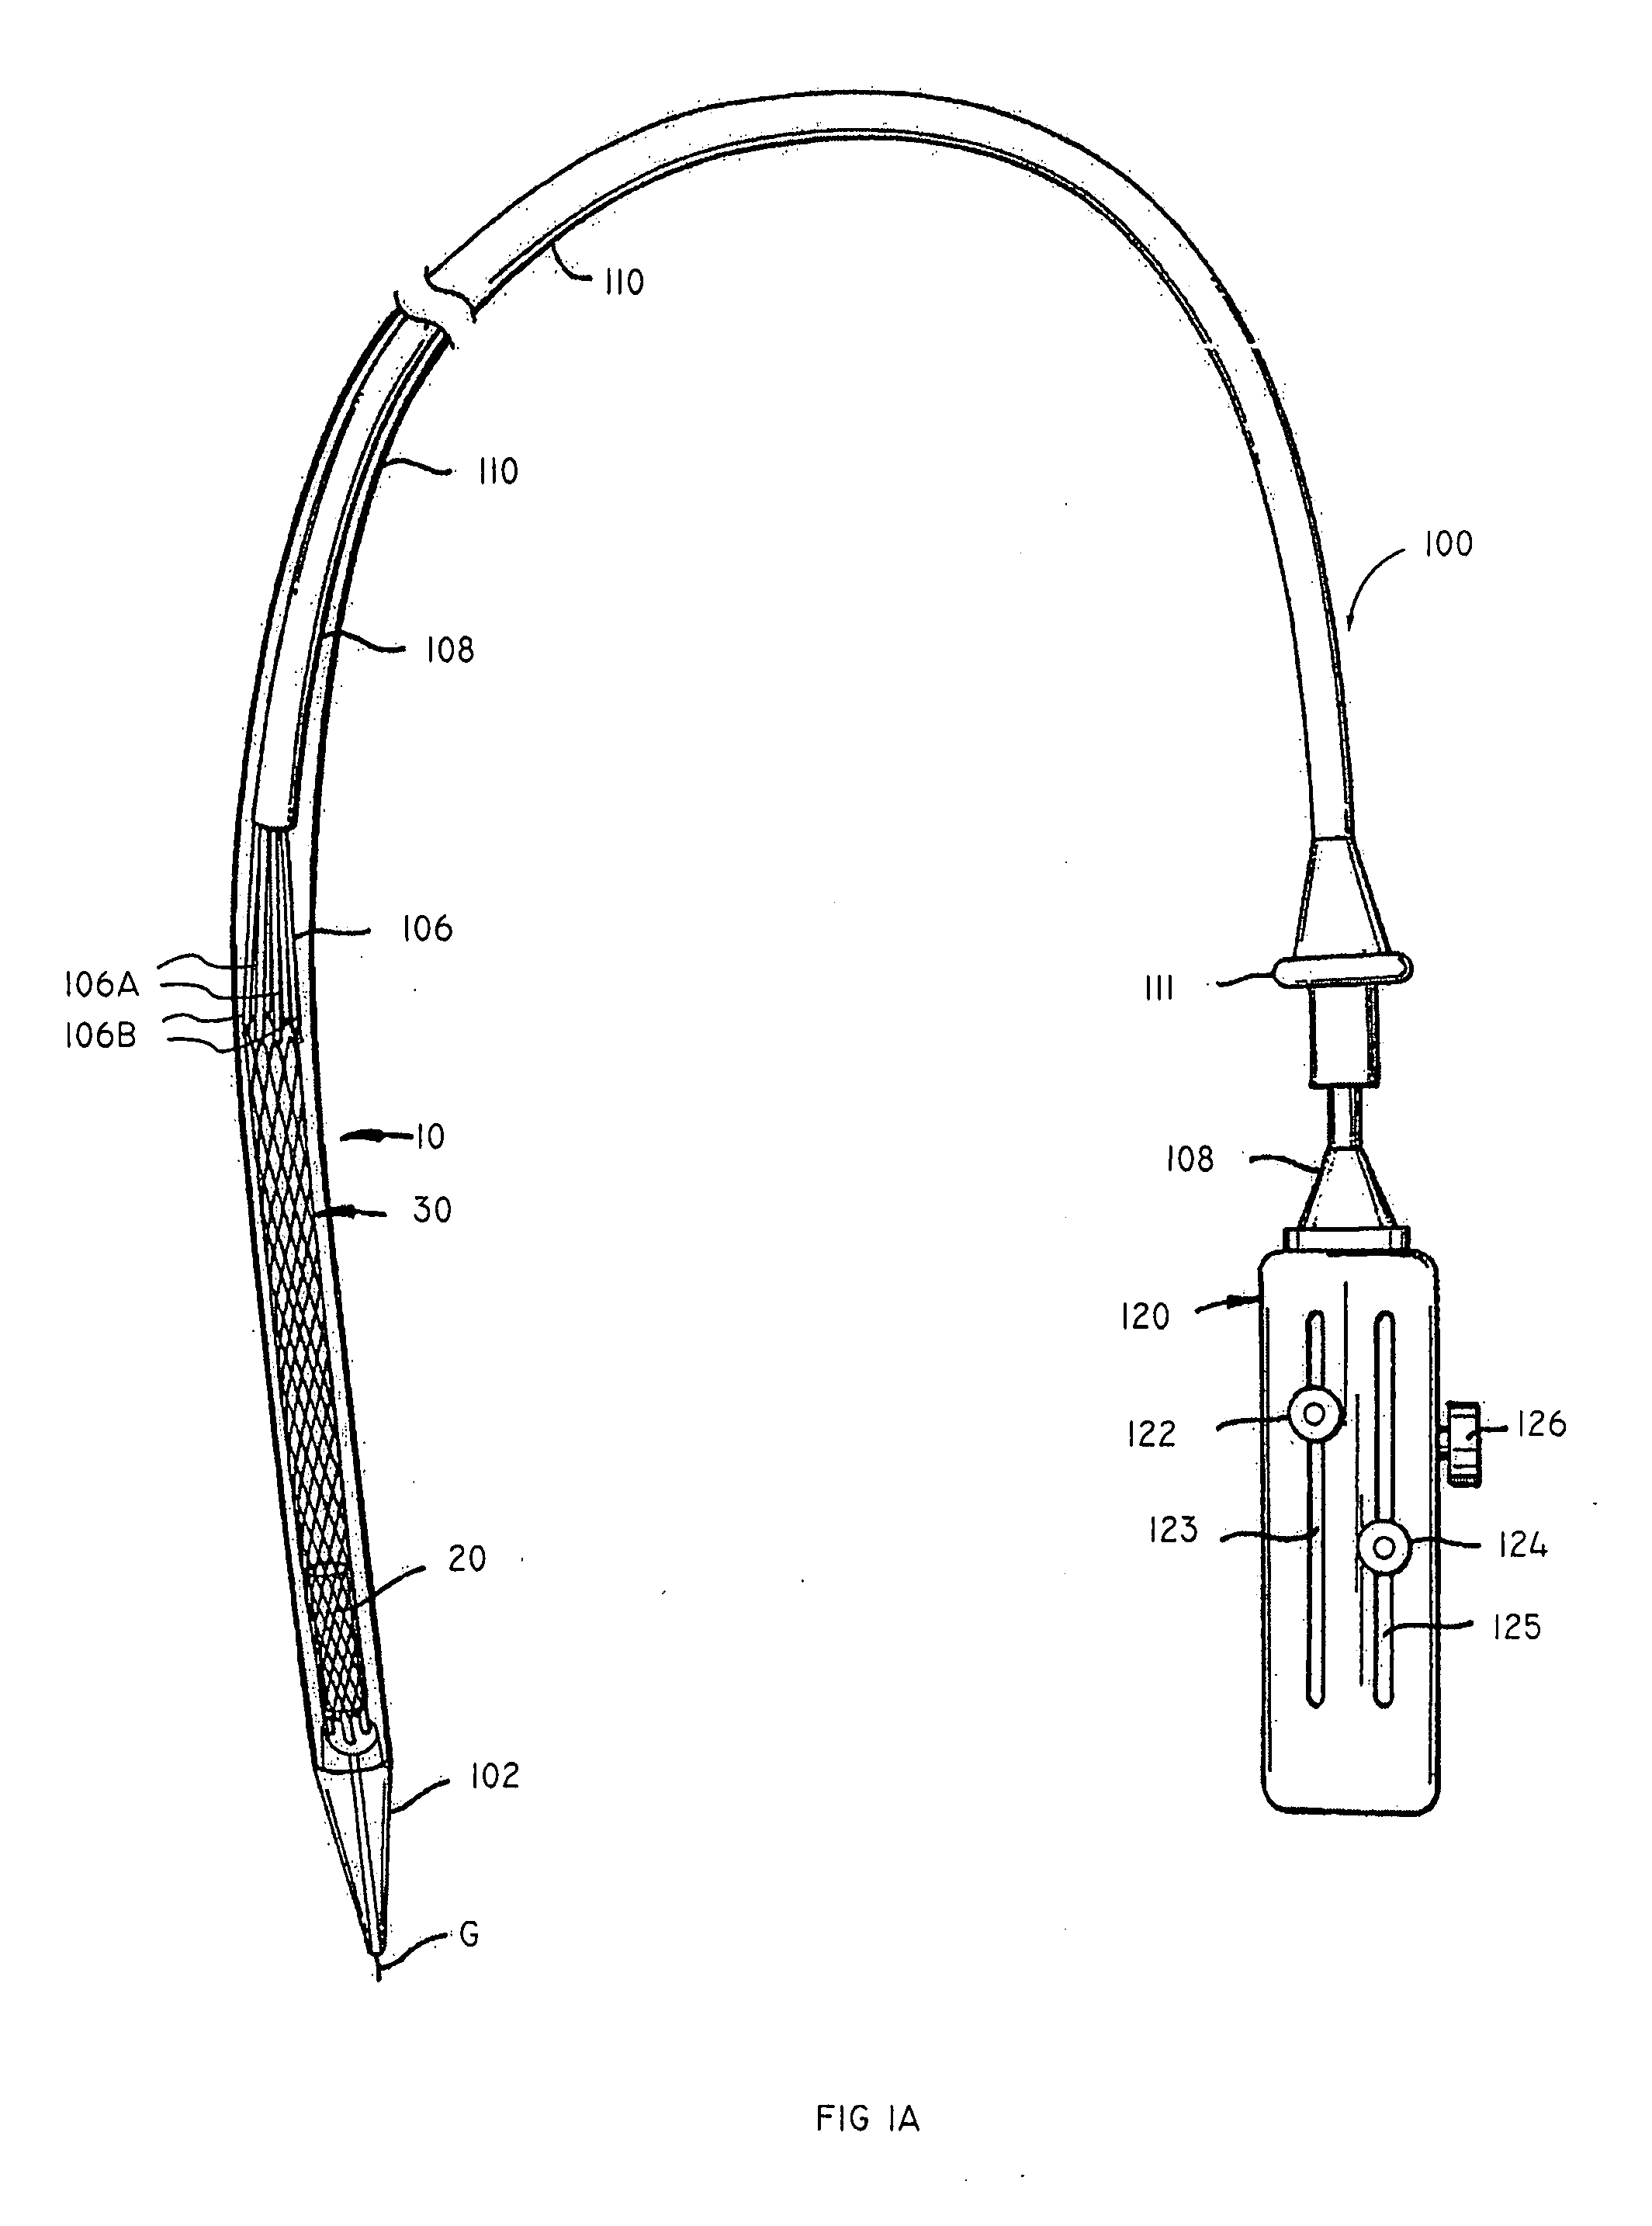 Systems and methods for delivering a medical implant